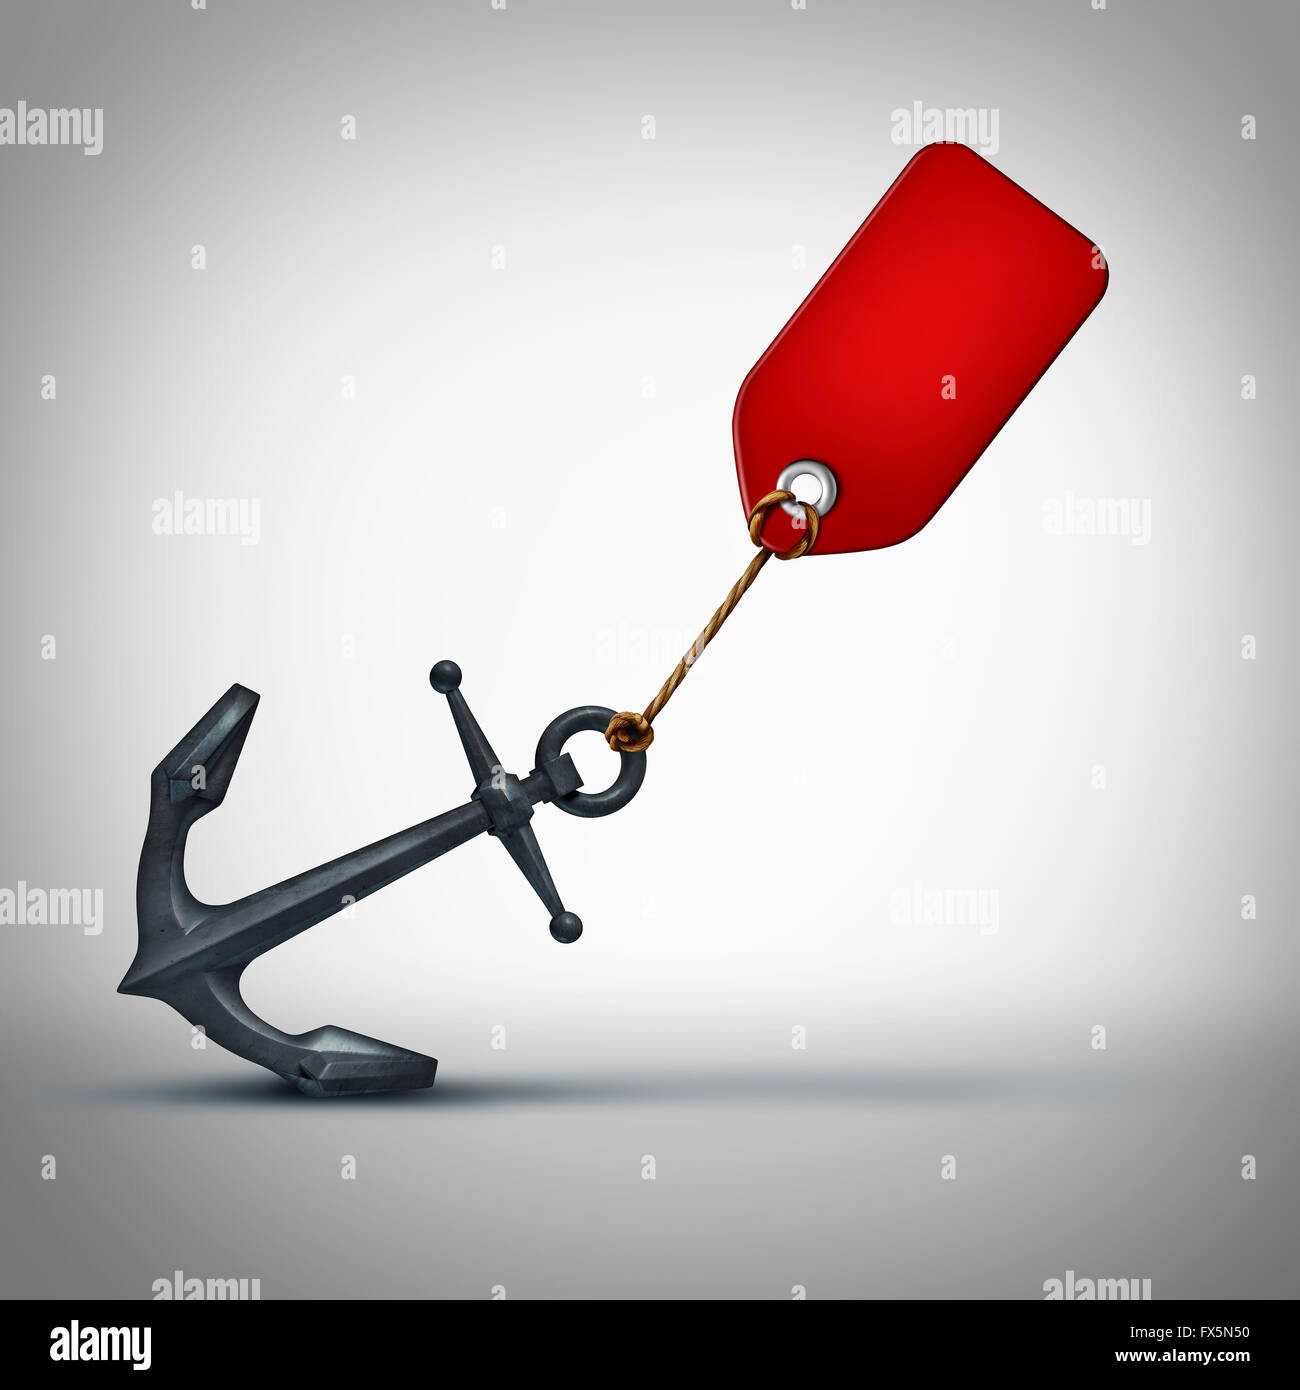 Sales problem business concept as a price tag pulling on a heavy anchor as a financial crisis metaphor and slow economy or sluggish retail selling symbol as a 3D illustration icon. Stock Photo